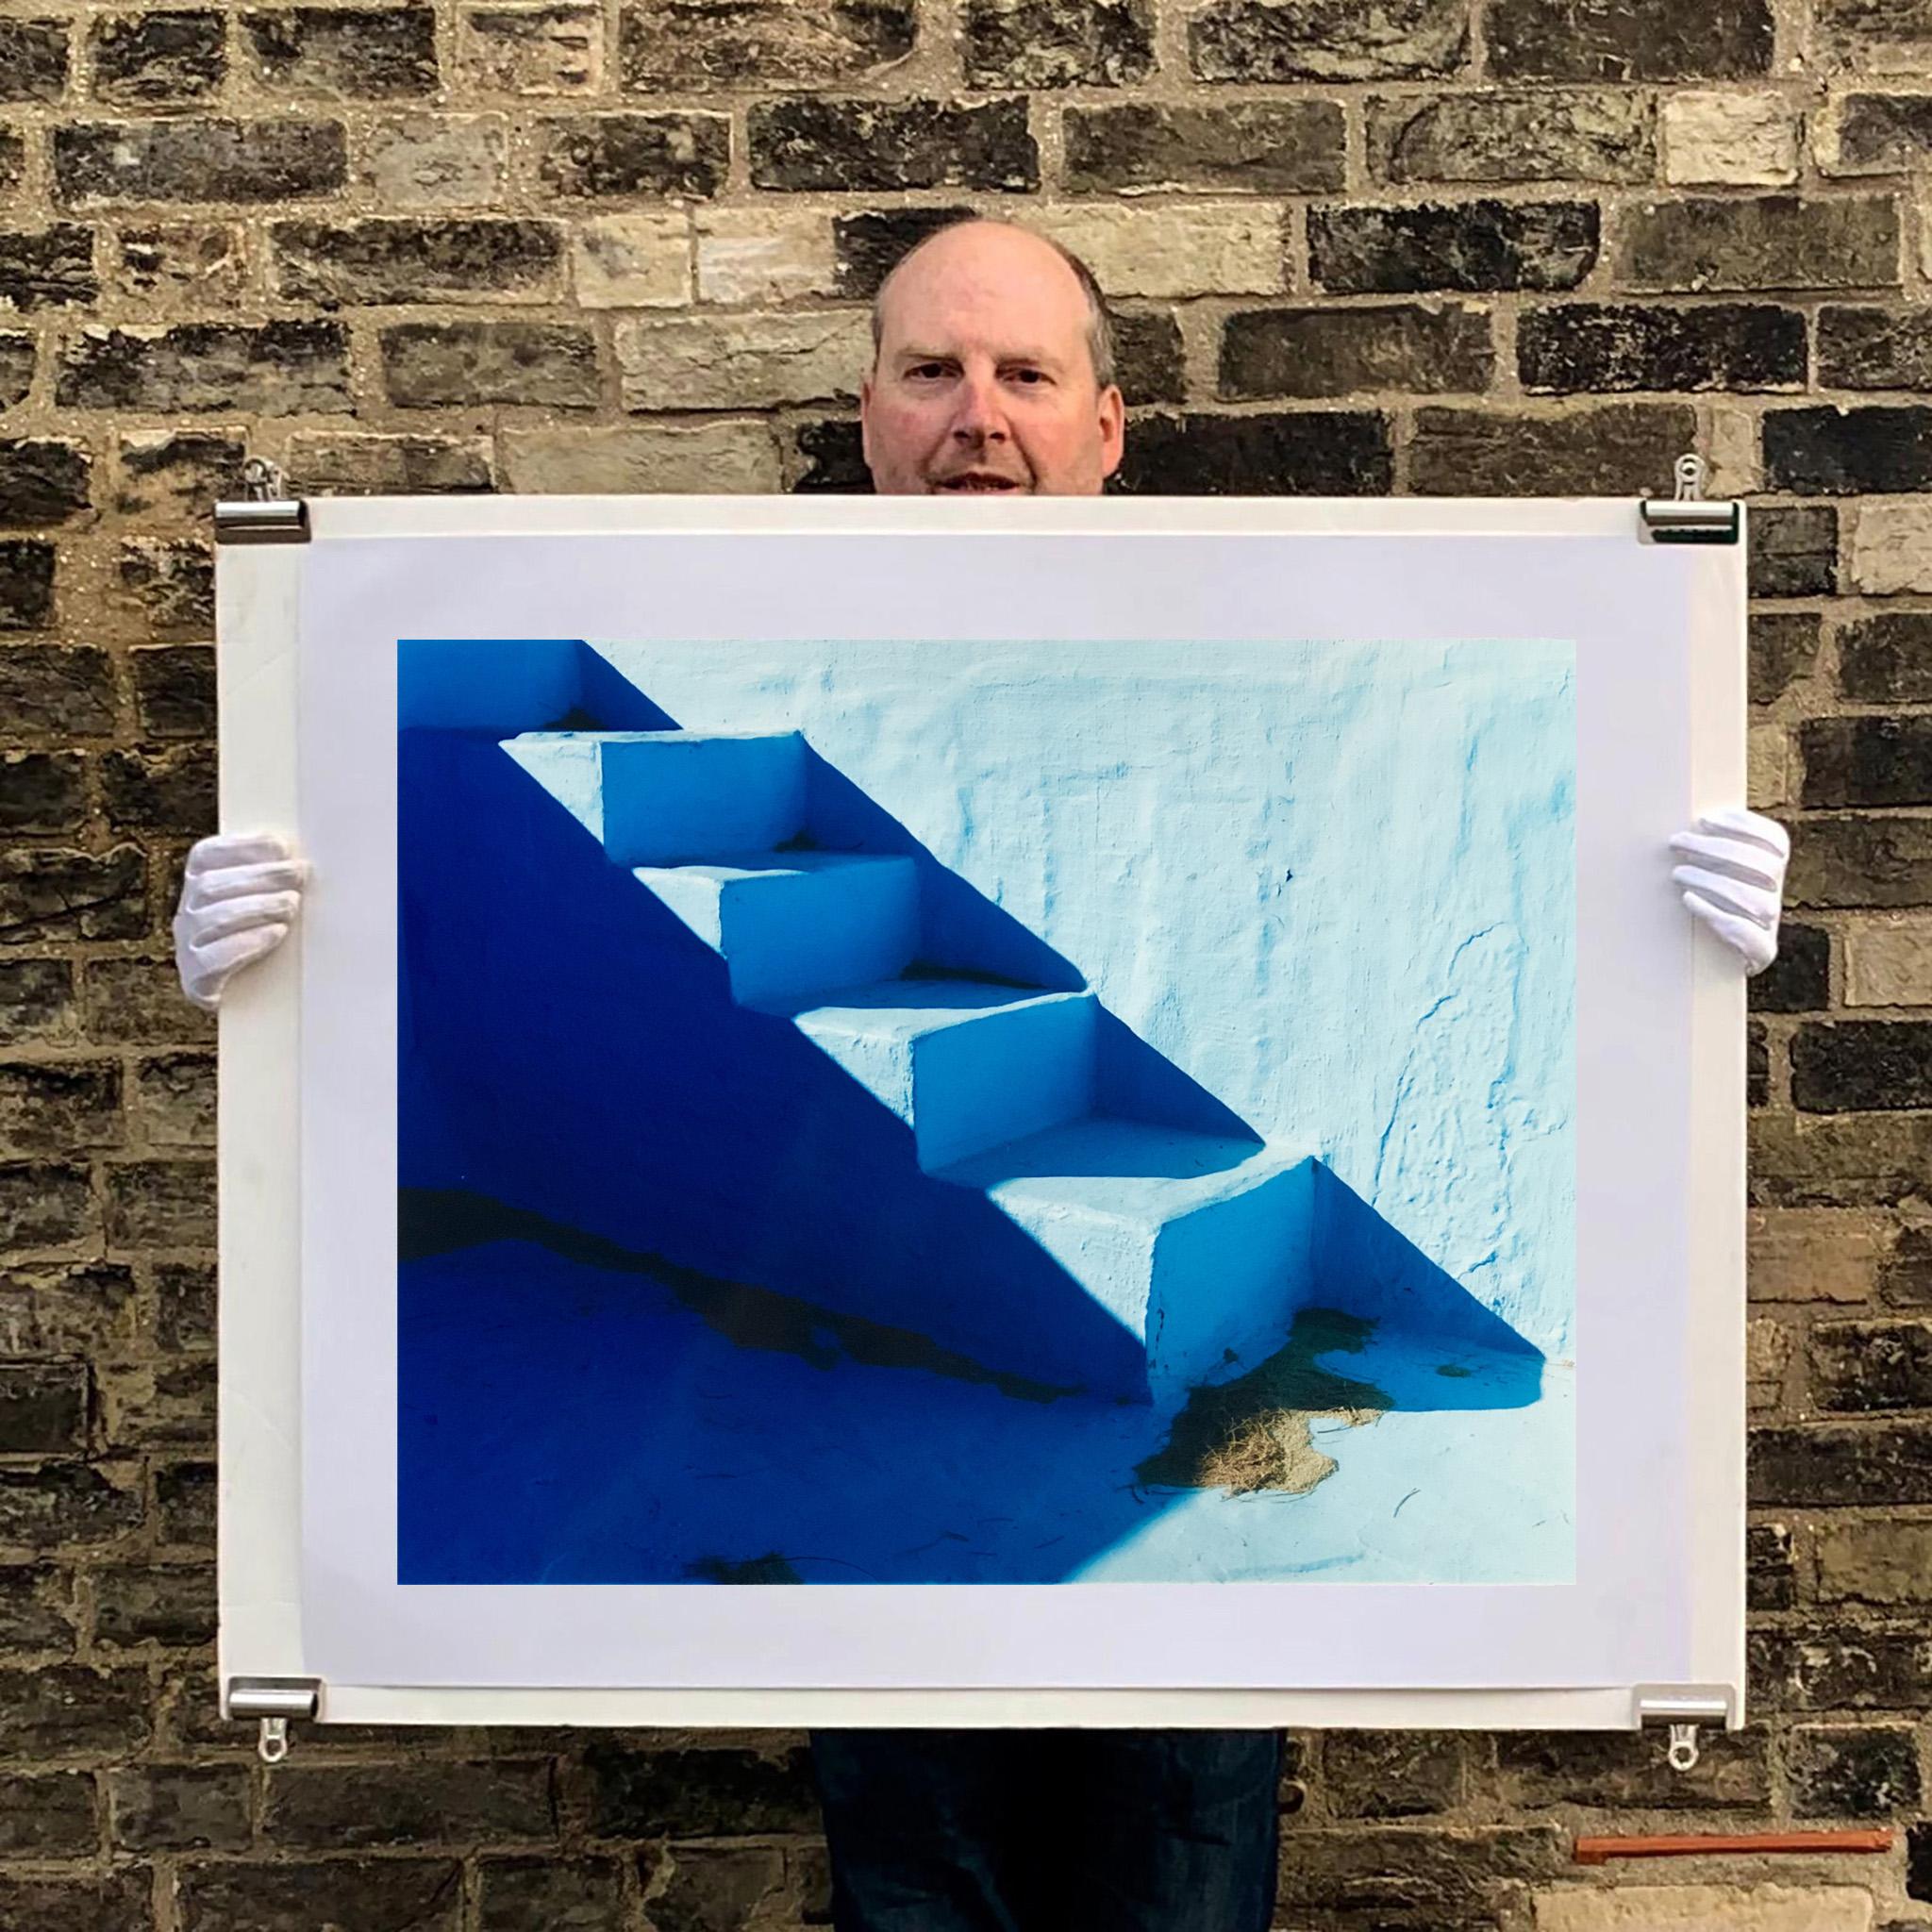 Steps, minimalist California summer vibes in this blue cinematic photograph from Richard Heeps 'Dream in Colour' Series.

This artwork is a limited edition of 25, gloss photographic print, accompanied by a signed and numbered certificate of